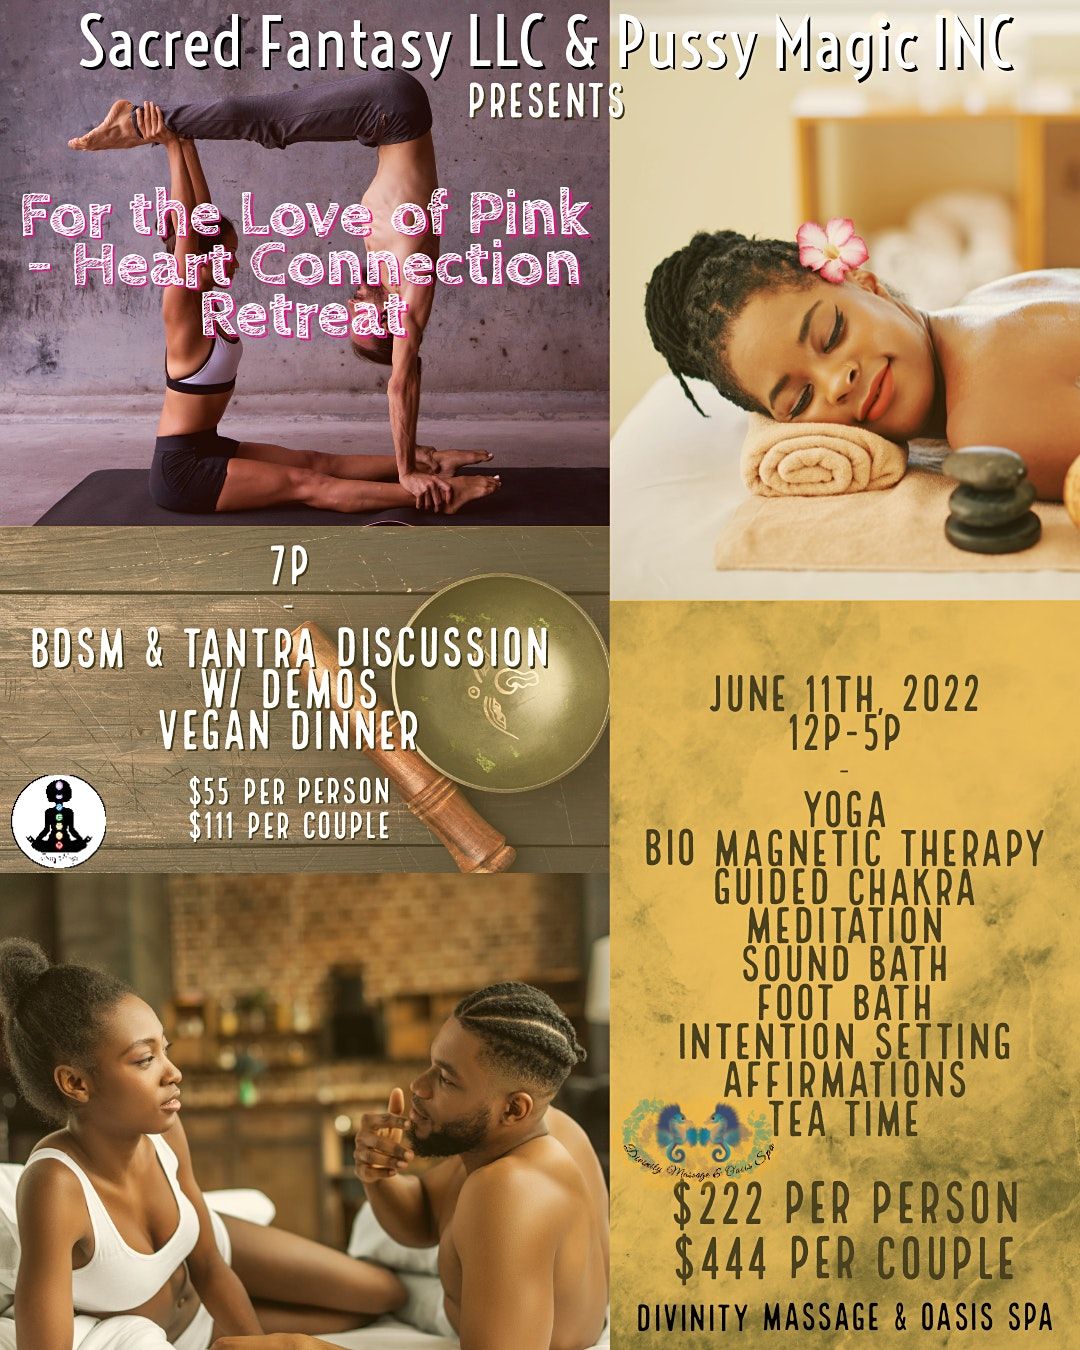 For the Love of Pink - Heart Connection Retreat